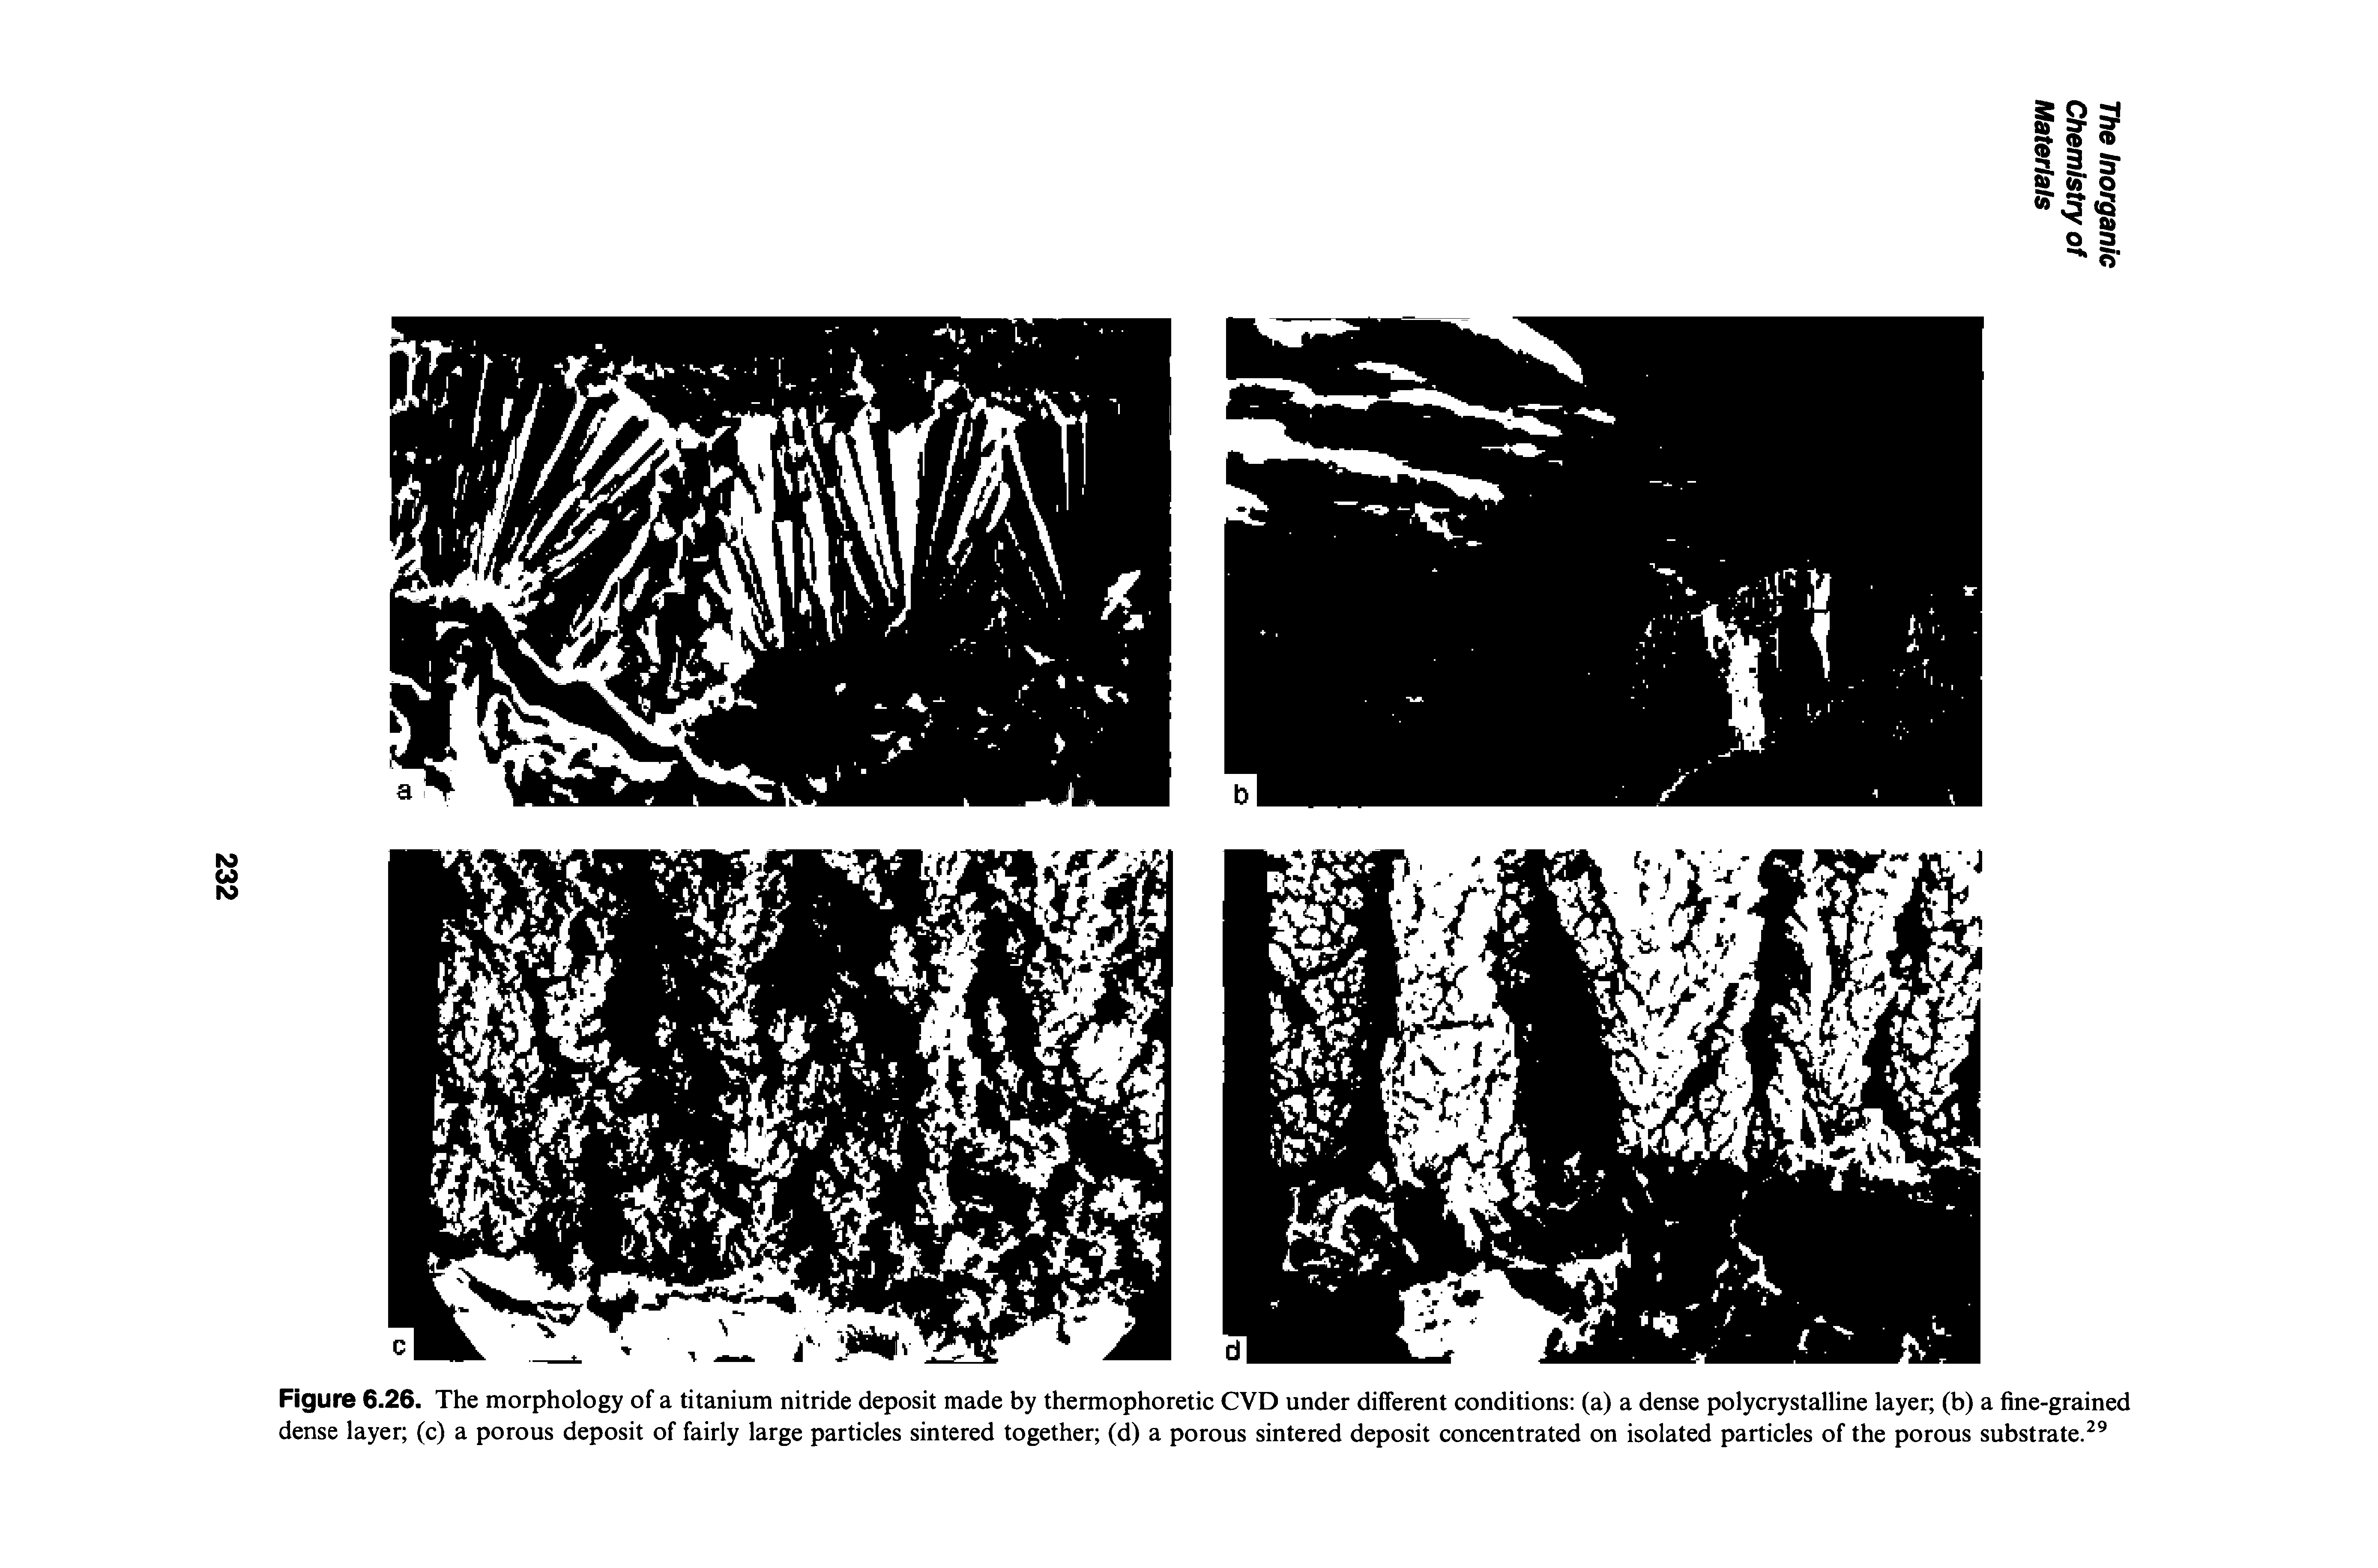 Figure 6.26. The morphology of a titanium nitride deposit made by thermophoretic CVD under different conditions (a) a dense polycrystalline layer (b) a fine-grained dense layer (c) a porous deposit of fairly large particles sintered together (d) a porous sintered deposit concentrated on isolated particles of the porous substrate. ...